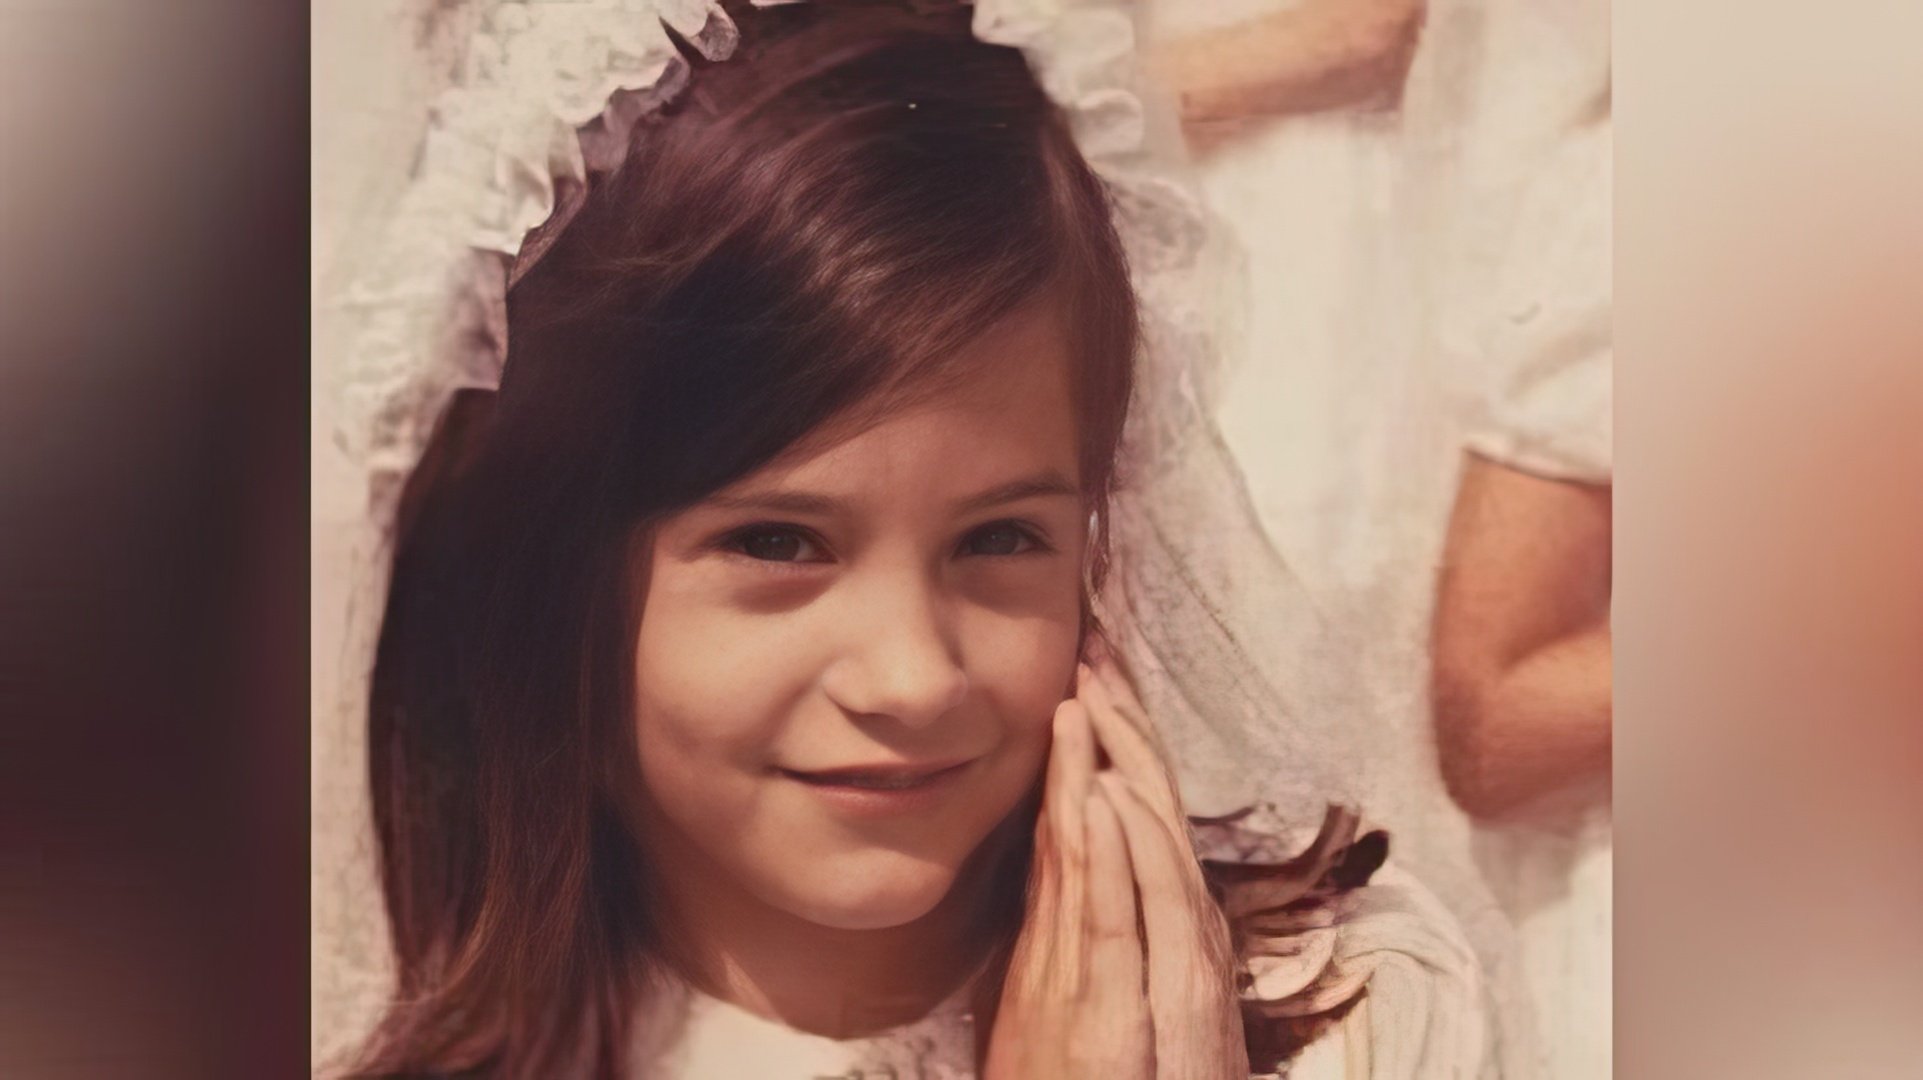 Courtney Cox as a child